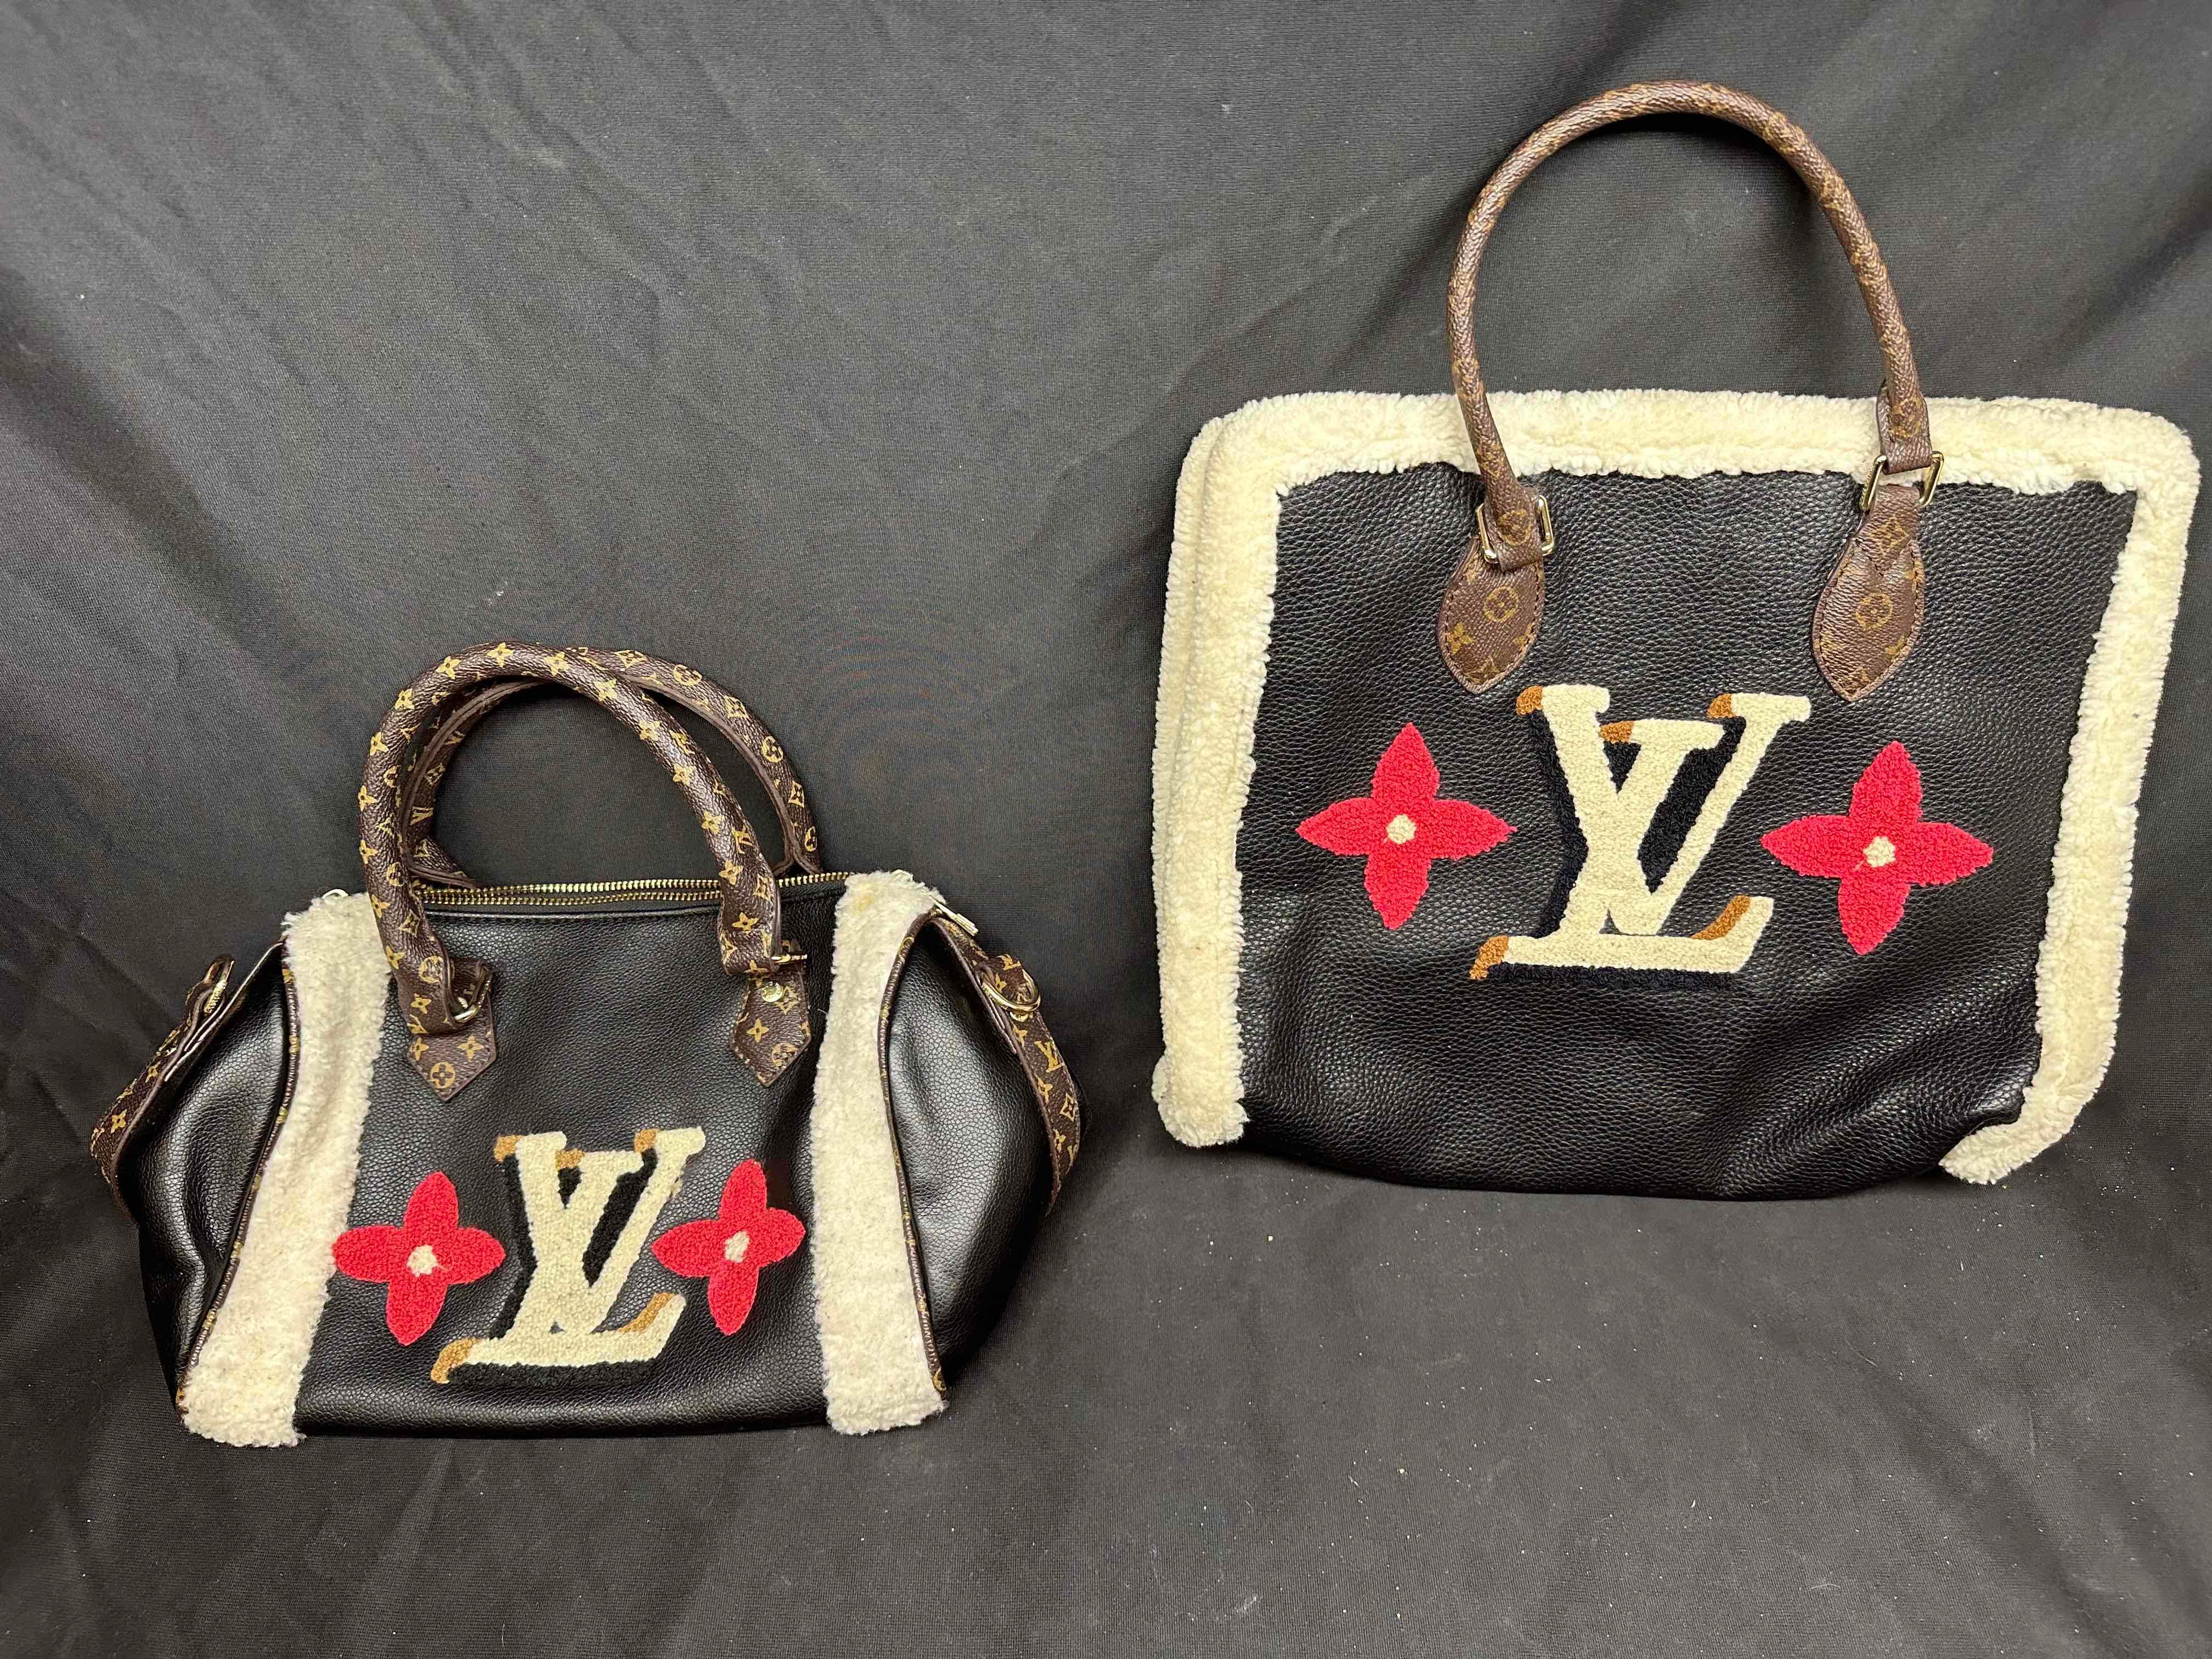 Who Designs For The Louis Vuitton Labeled